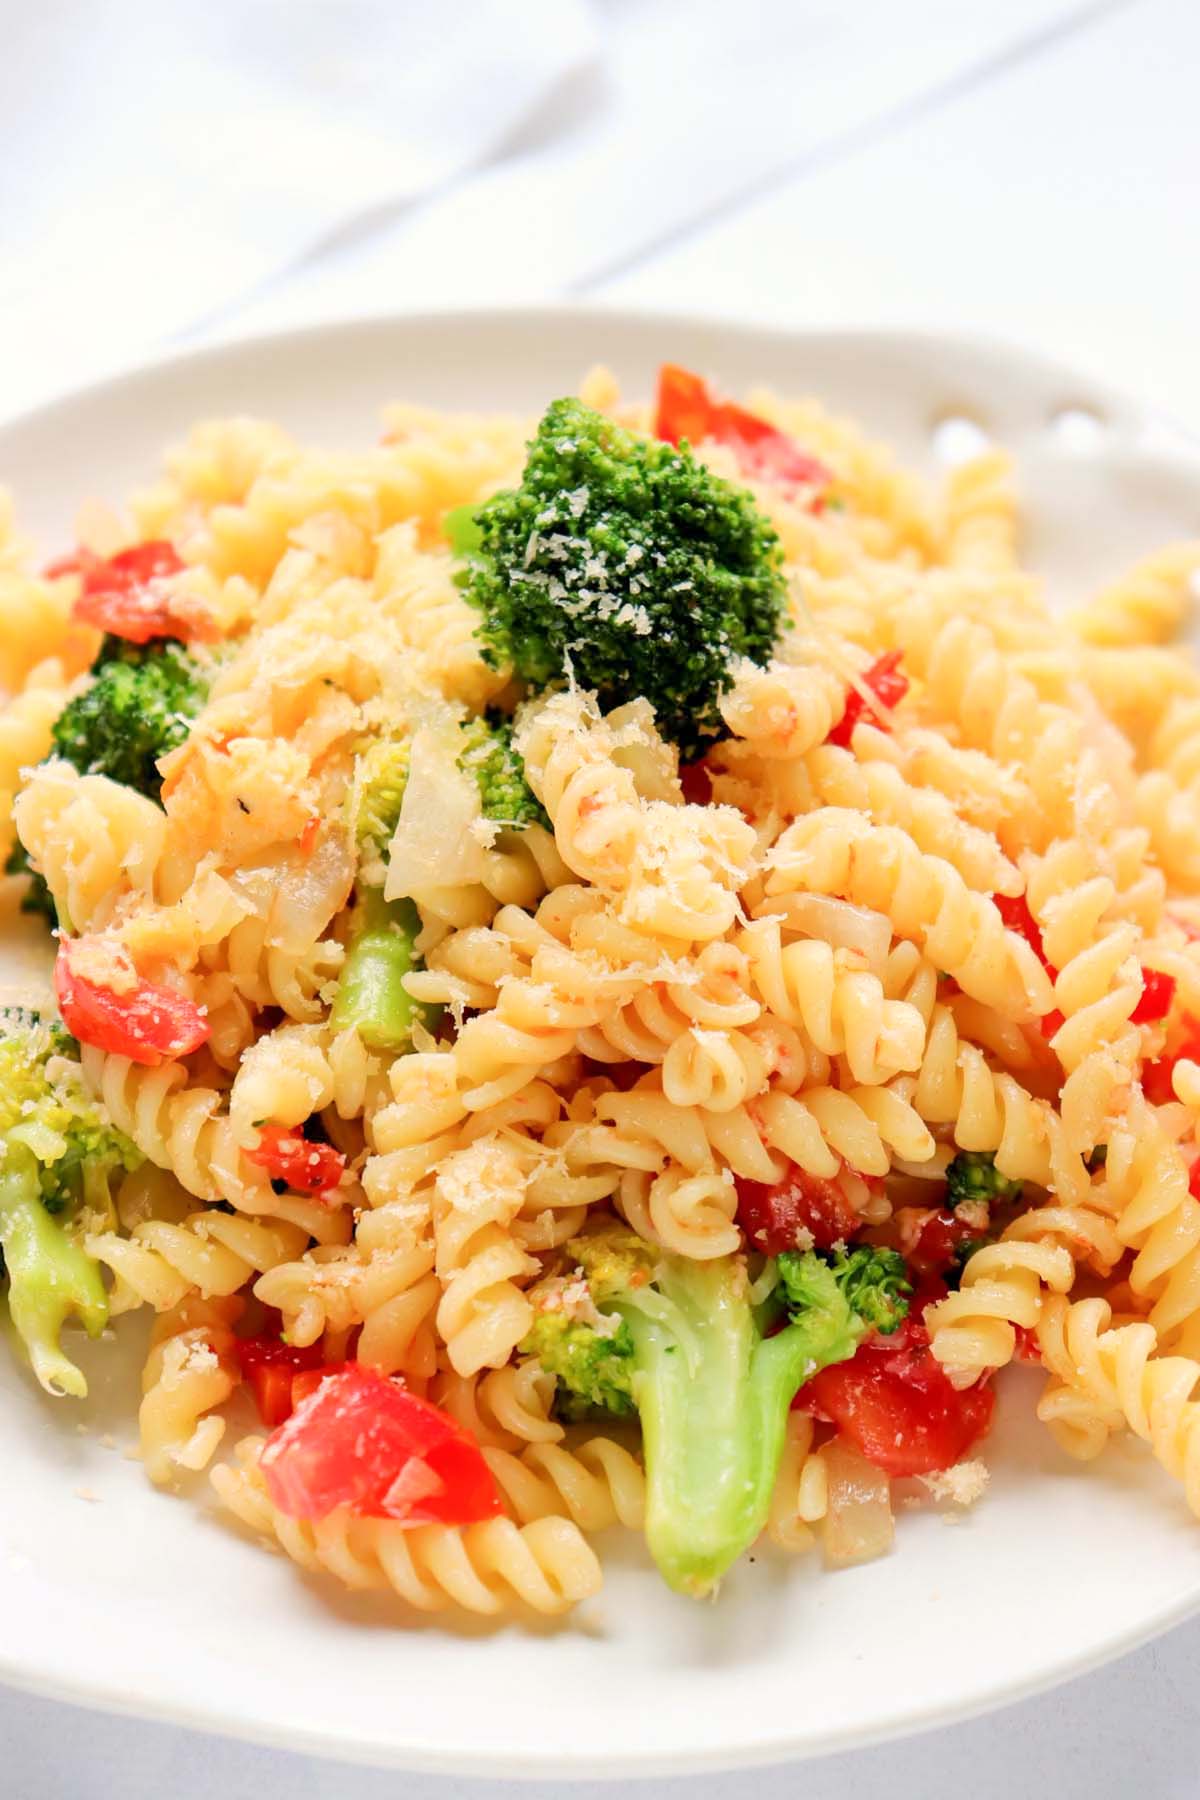 Pasta salad on a plate.